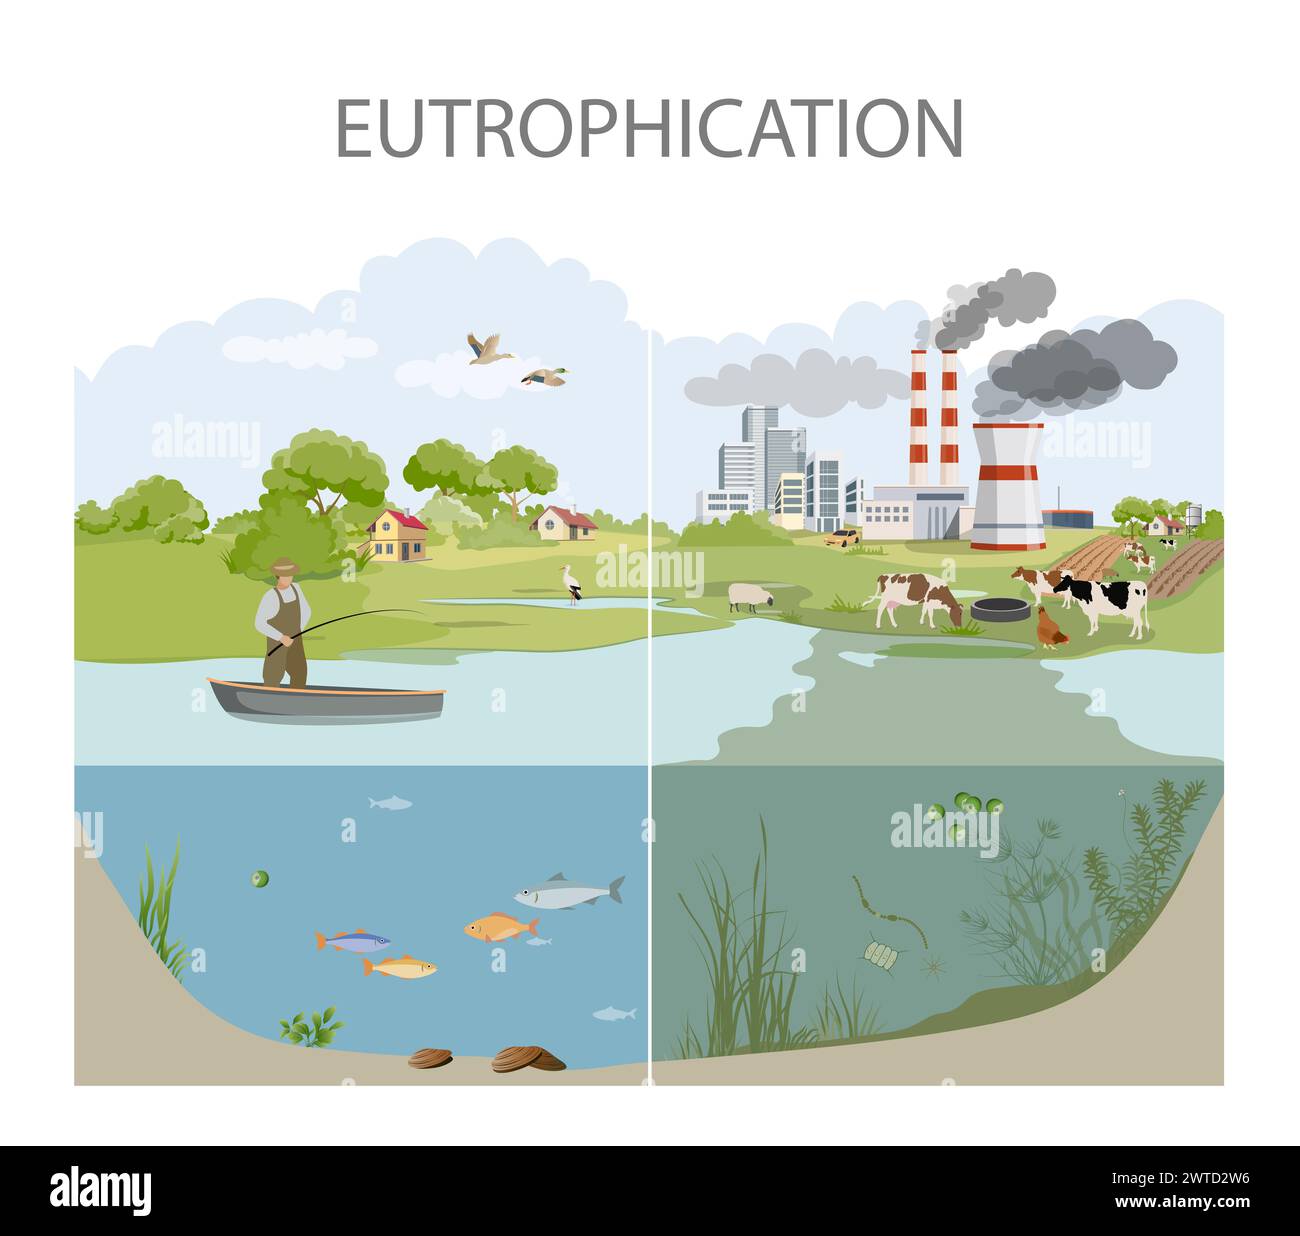 Eutrophication and Water Pollution illustration Stock Photo